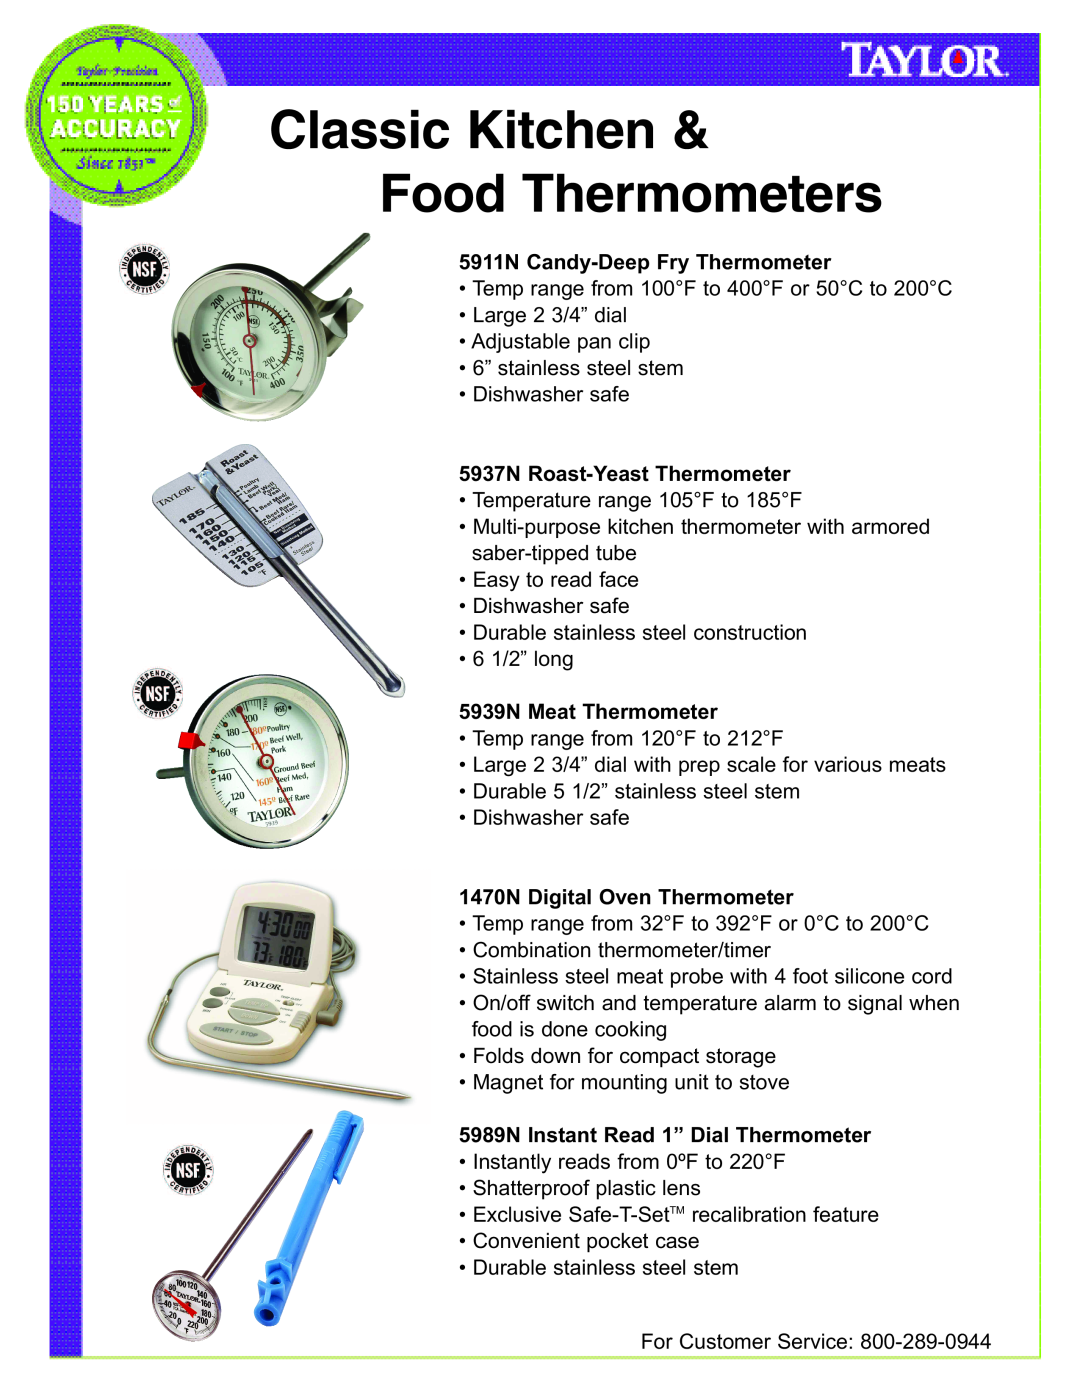 Taylor 5925N, 5932, 5983N, 5924 manual 5911N Candy-Deep Fry Thermometer, 5937N Roast-Yeast Thermometer, 5939N Meat Thermometer 